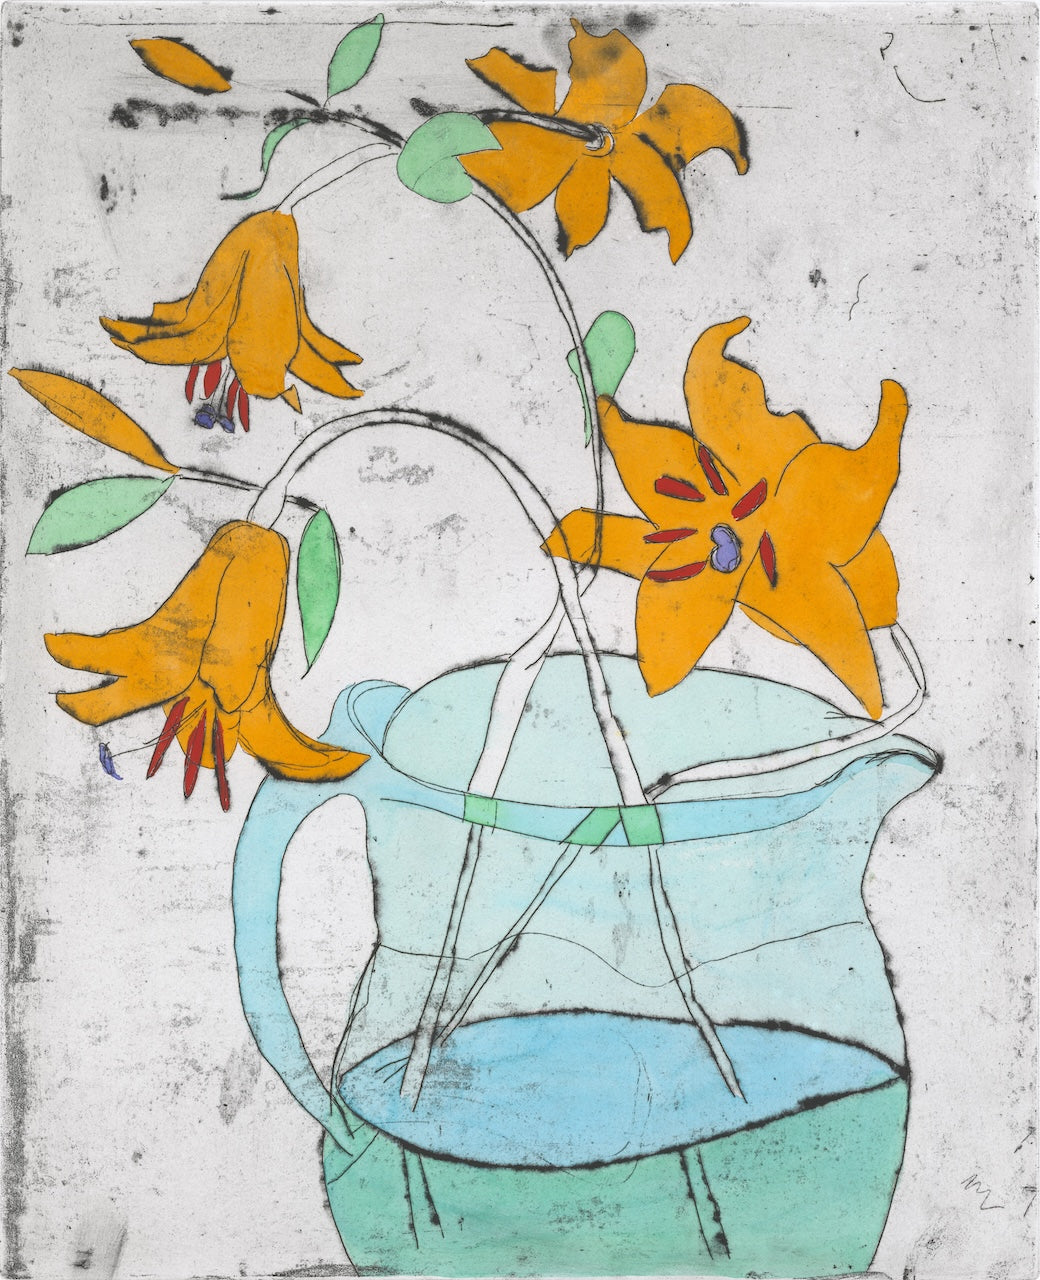 Aqua Jug - Limited Edition drypoint and watercolour fine art print by artist Richard Spare